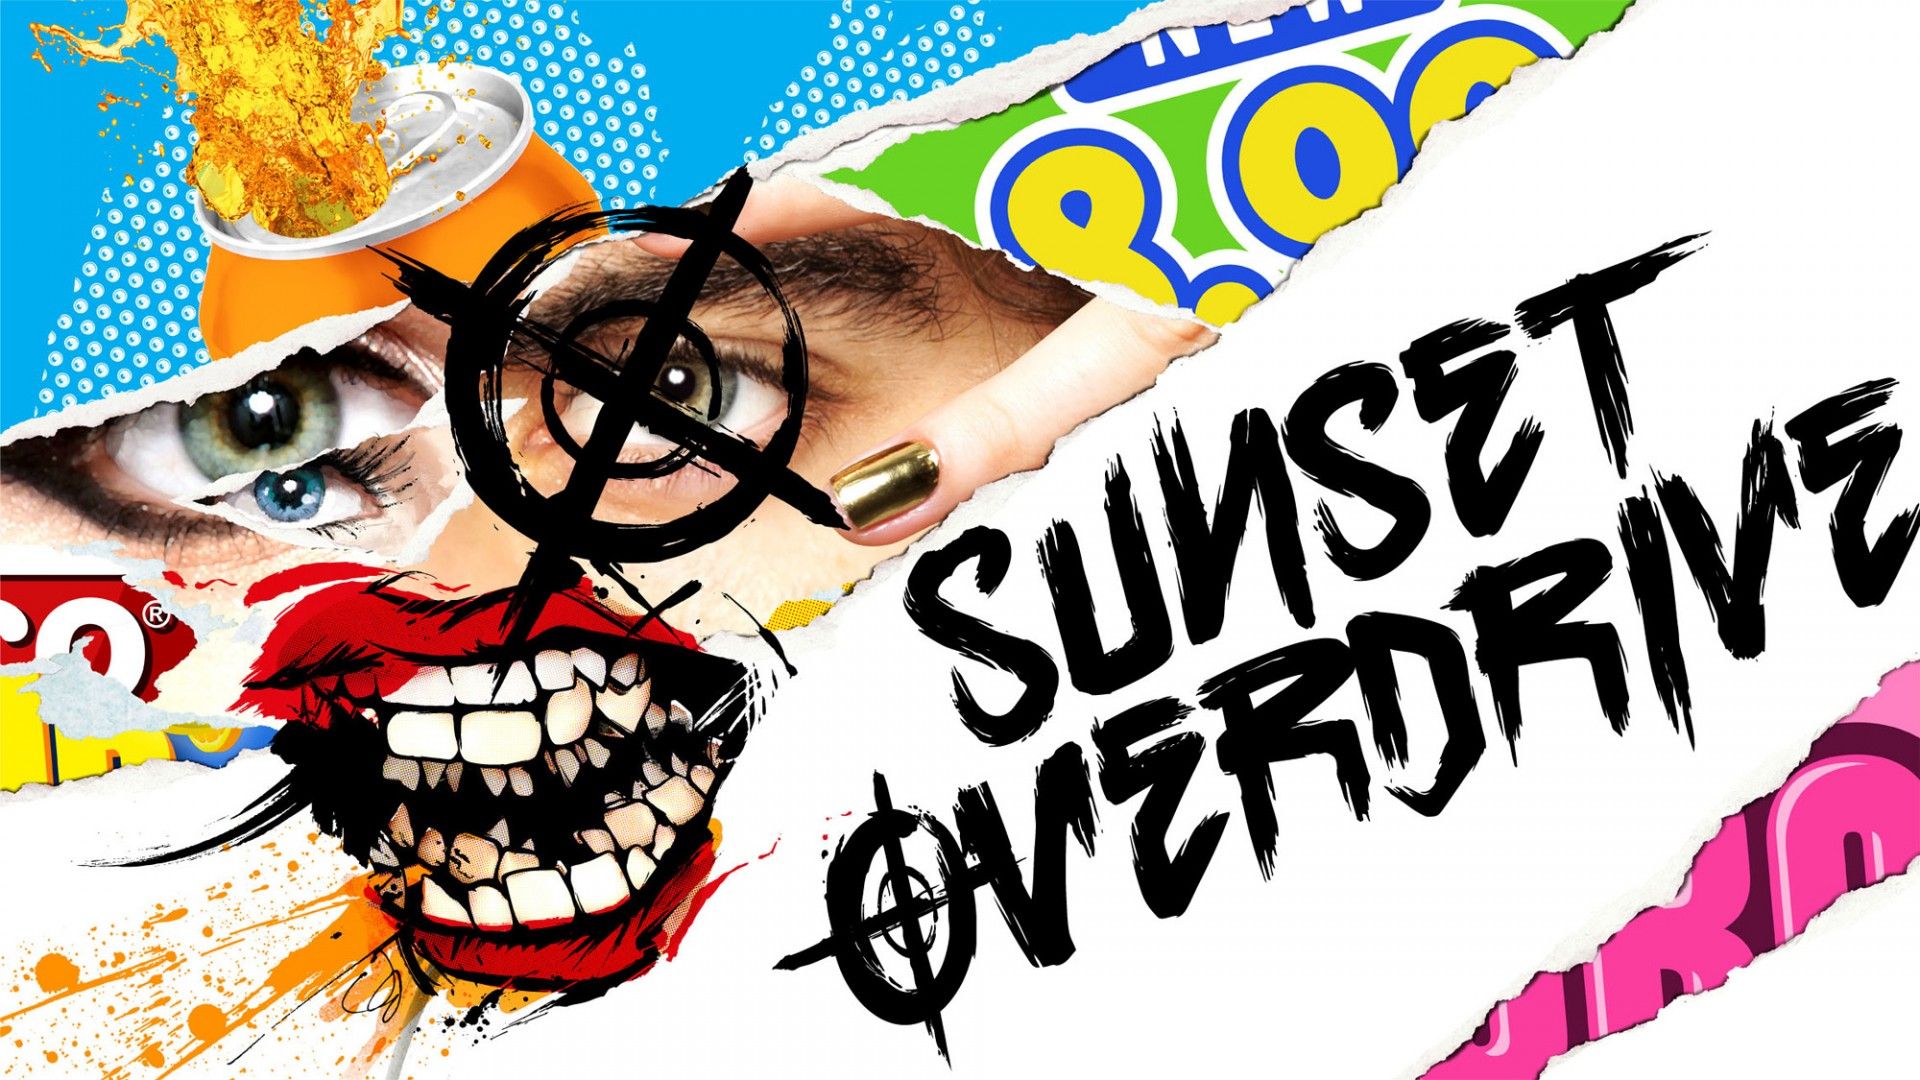 Sunset-Overdrive-Game-Wallpaper-1920x1080